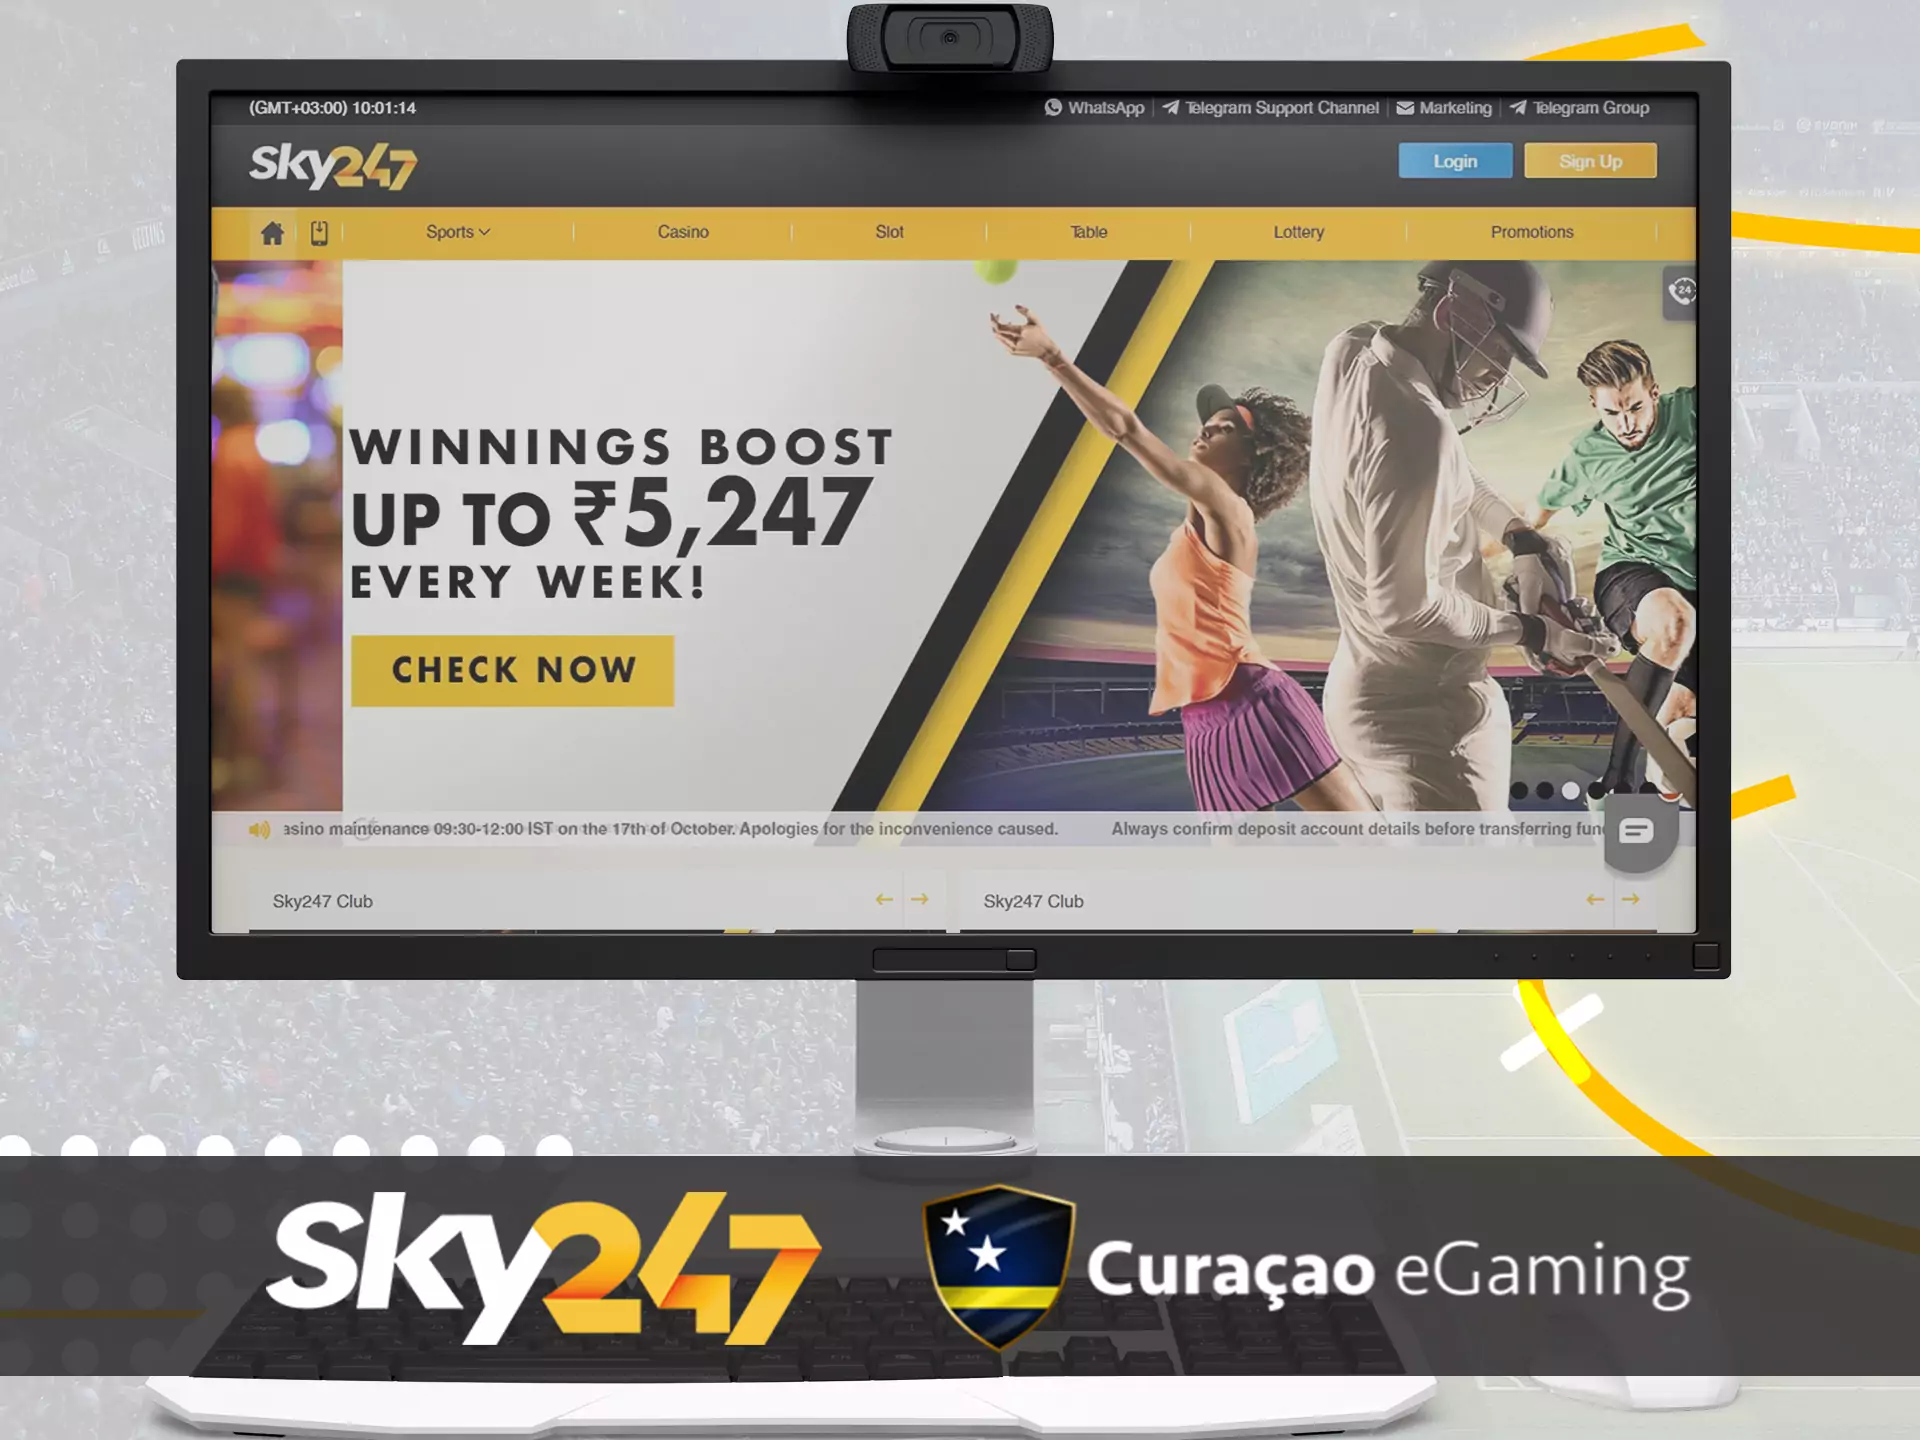 Betting on Sky247 is a legal online entertainment.